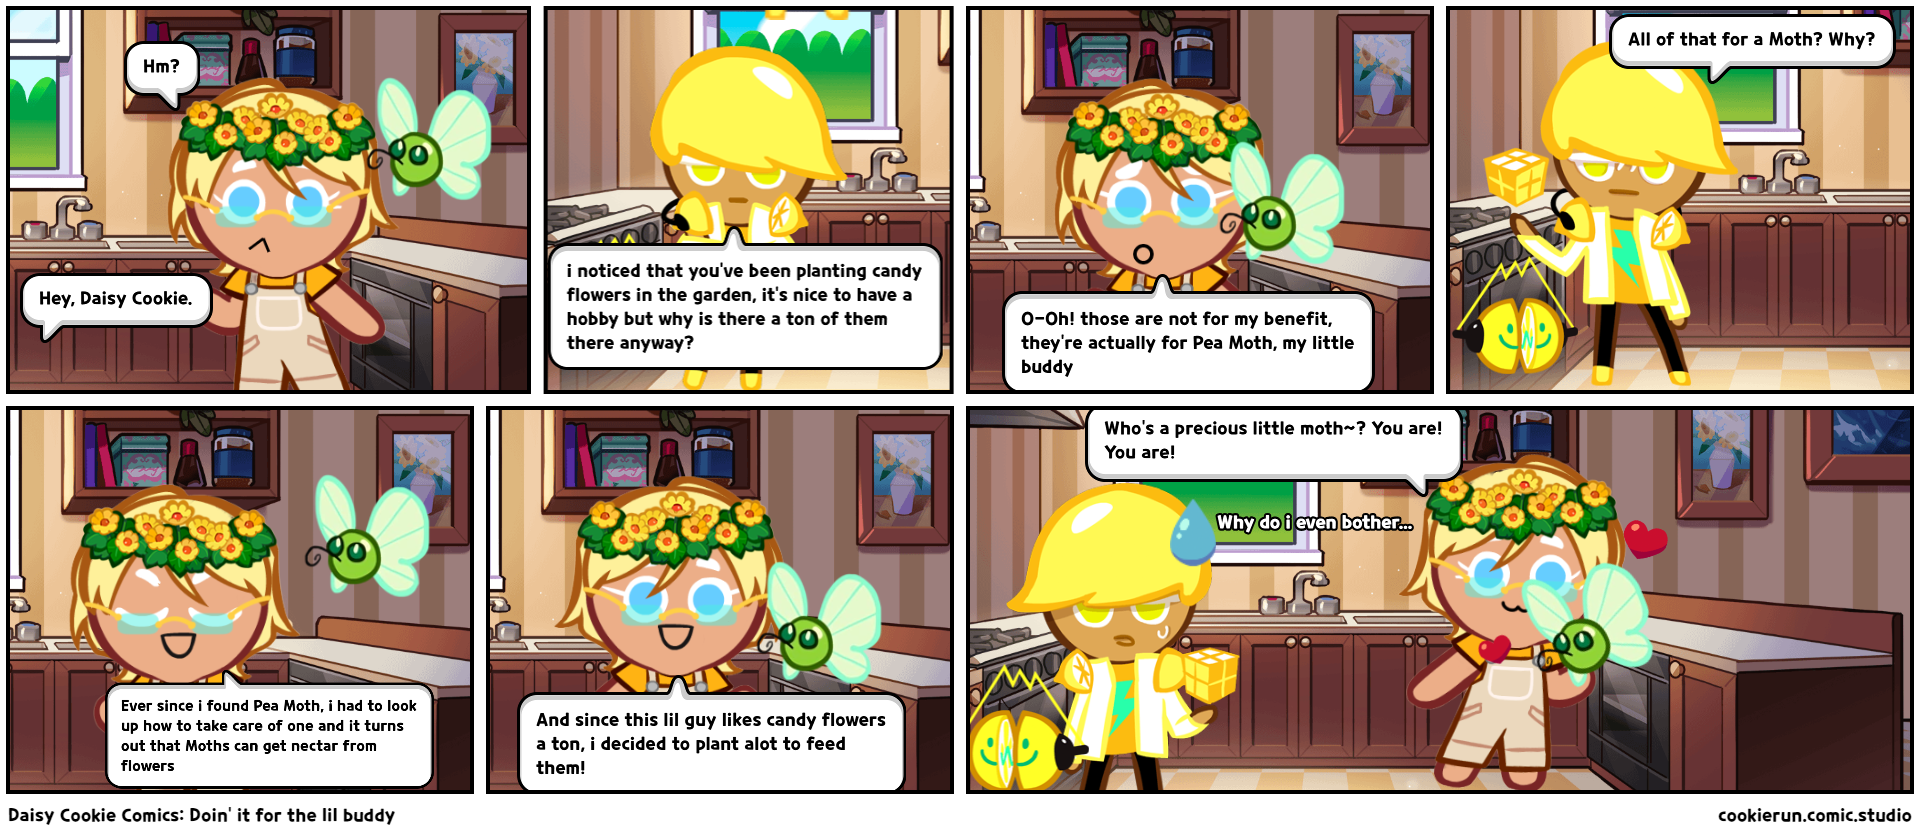 Daisy Cookie Comics: Doin' it for the lil buddy